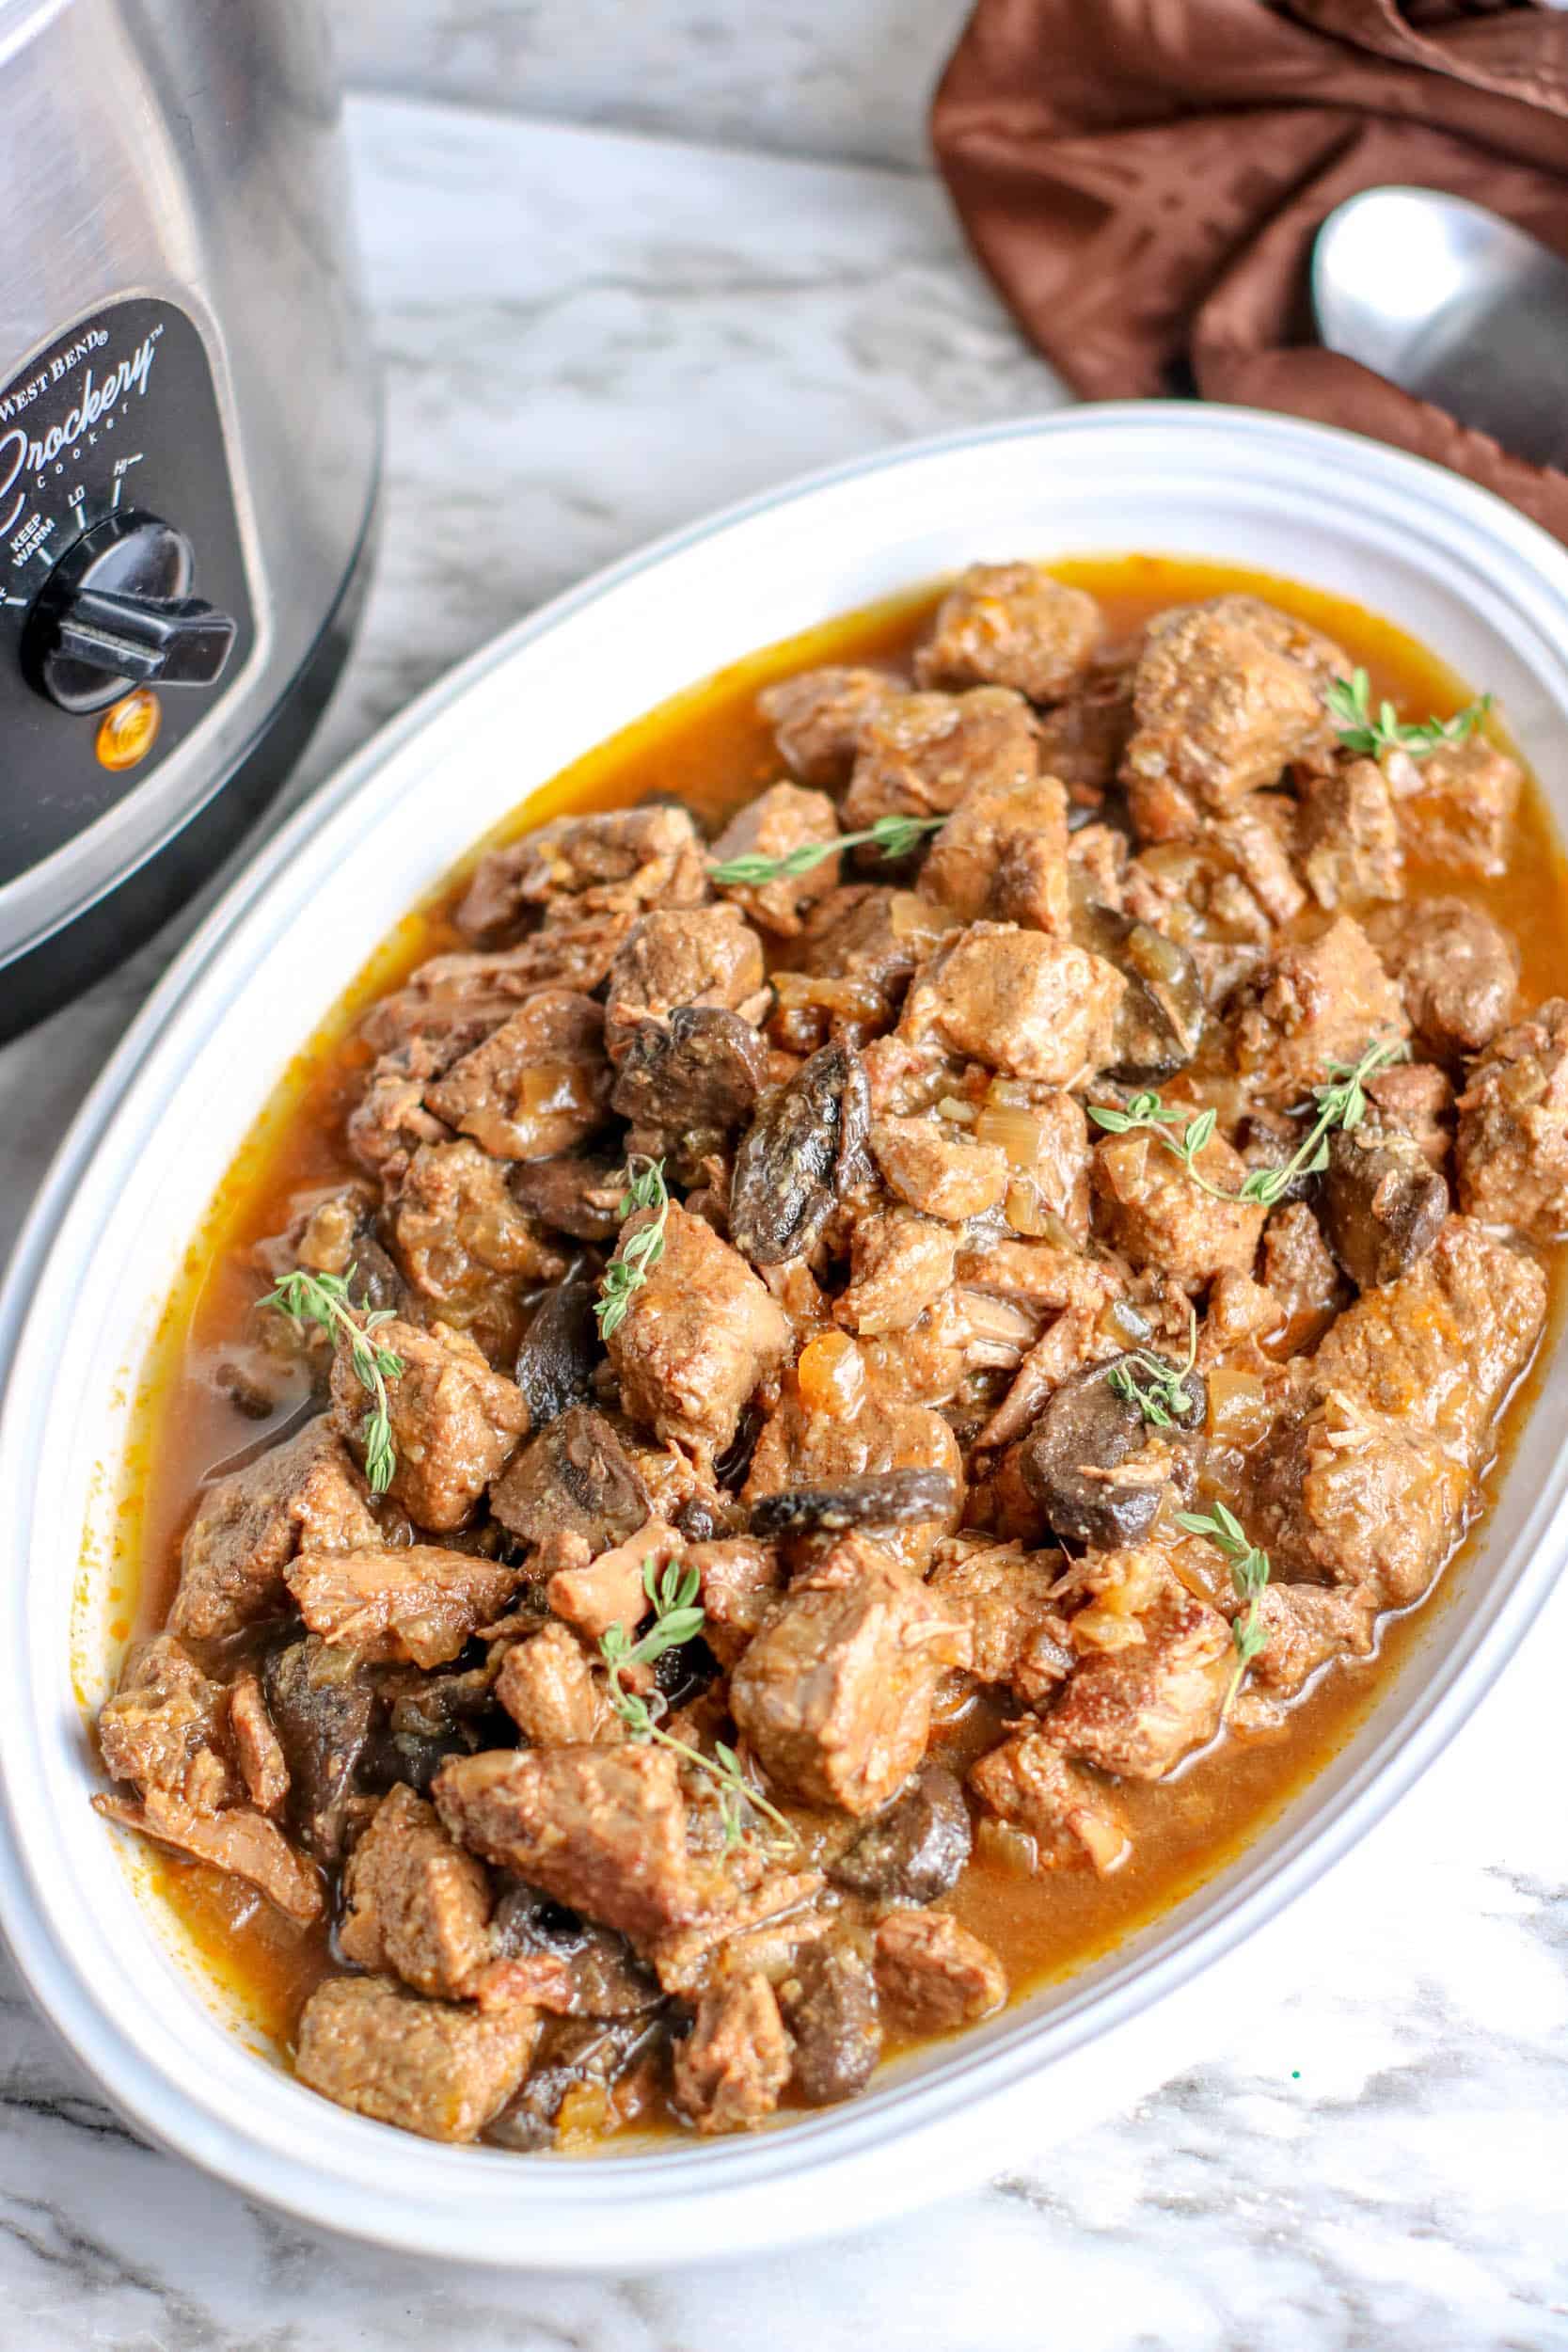 https://howtothisandthat.com/wp-content/uploads/2019/12/Slow-Cooker-Beef-Tips-and-Mushrooms-Sample-3-10.jpg